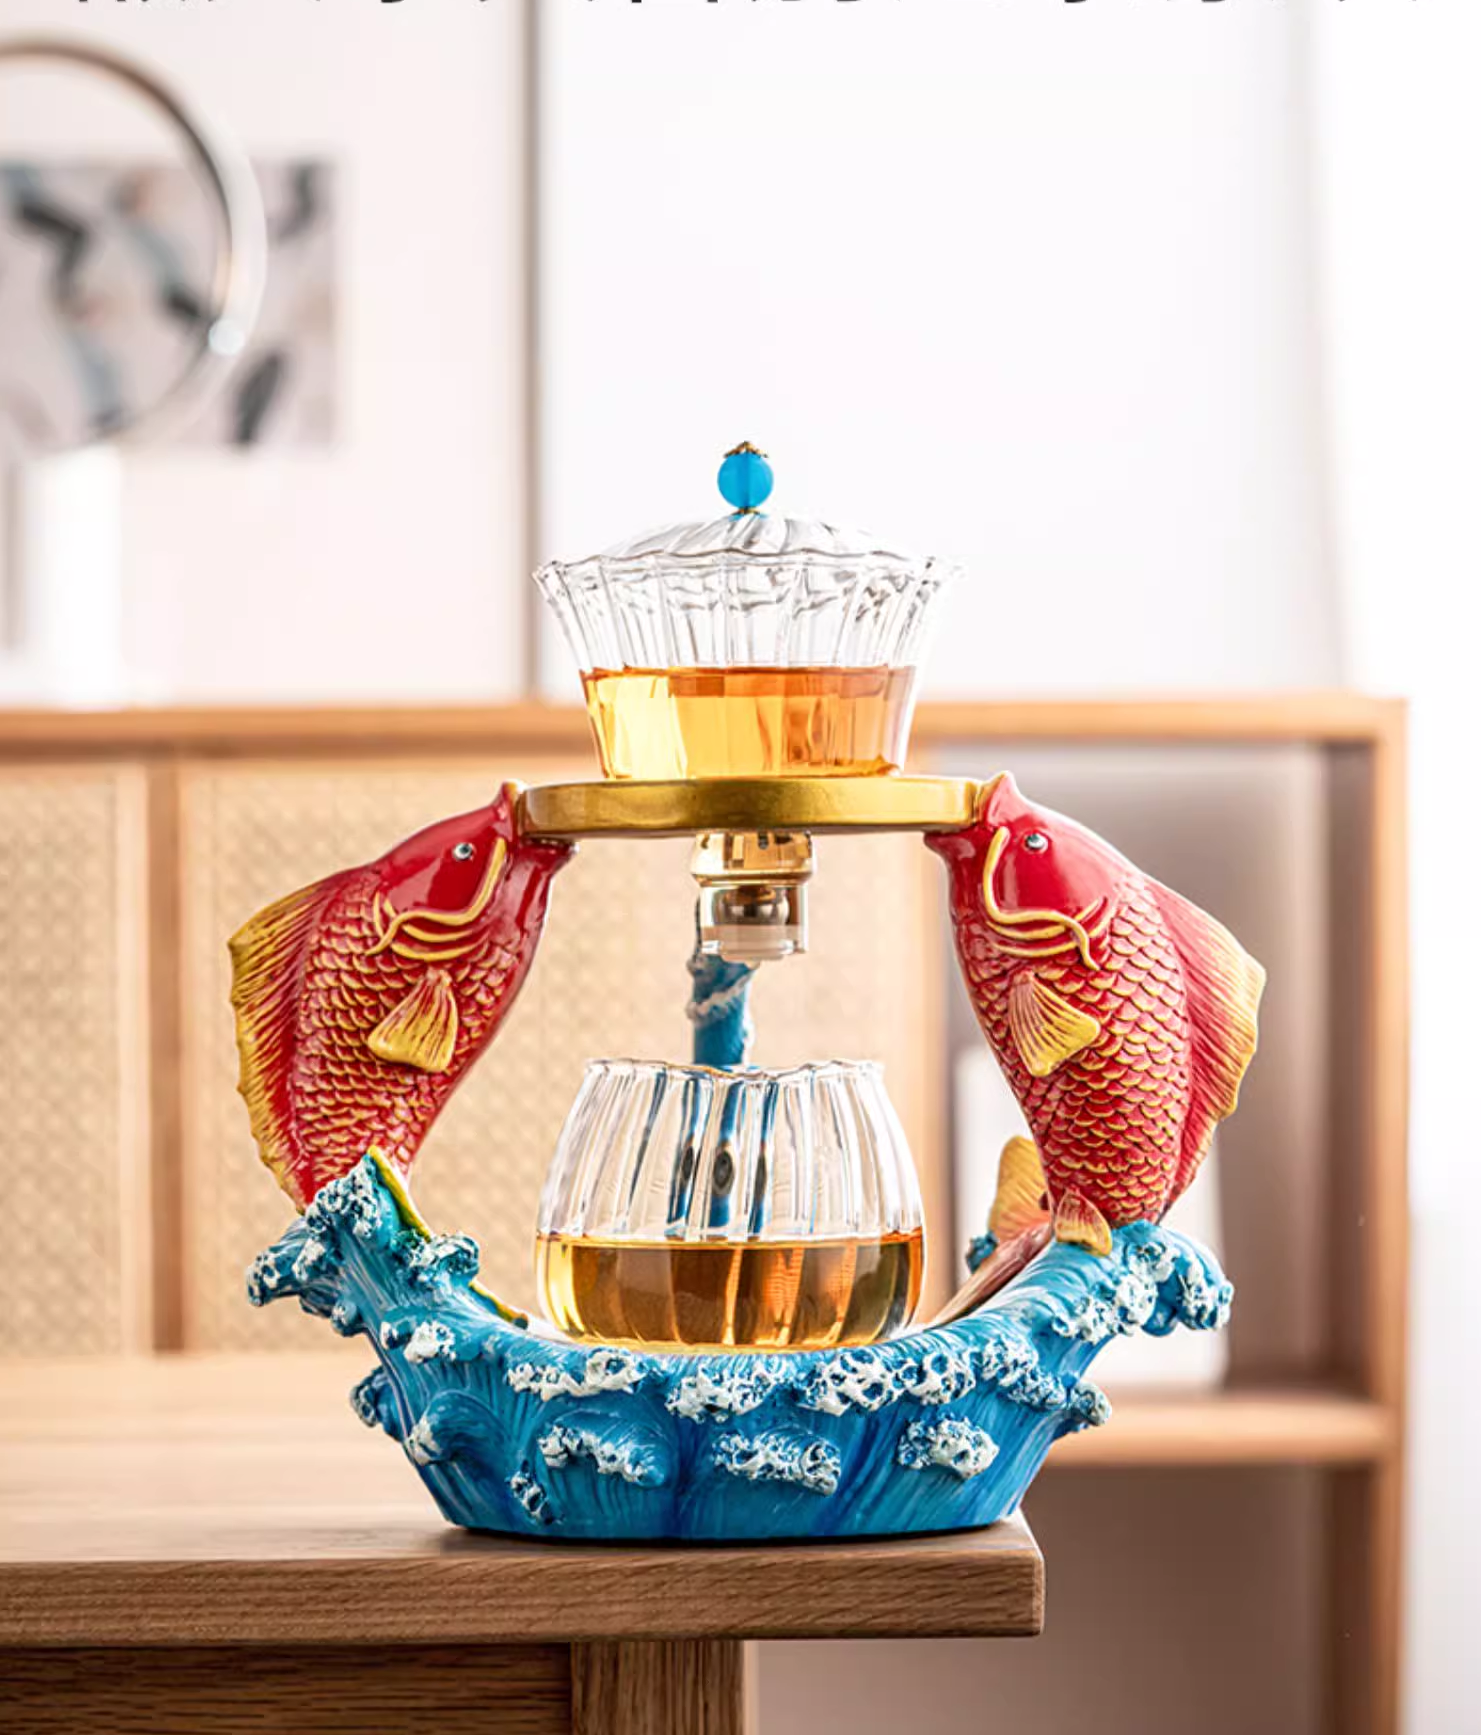 this is an automatic glass teapot